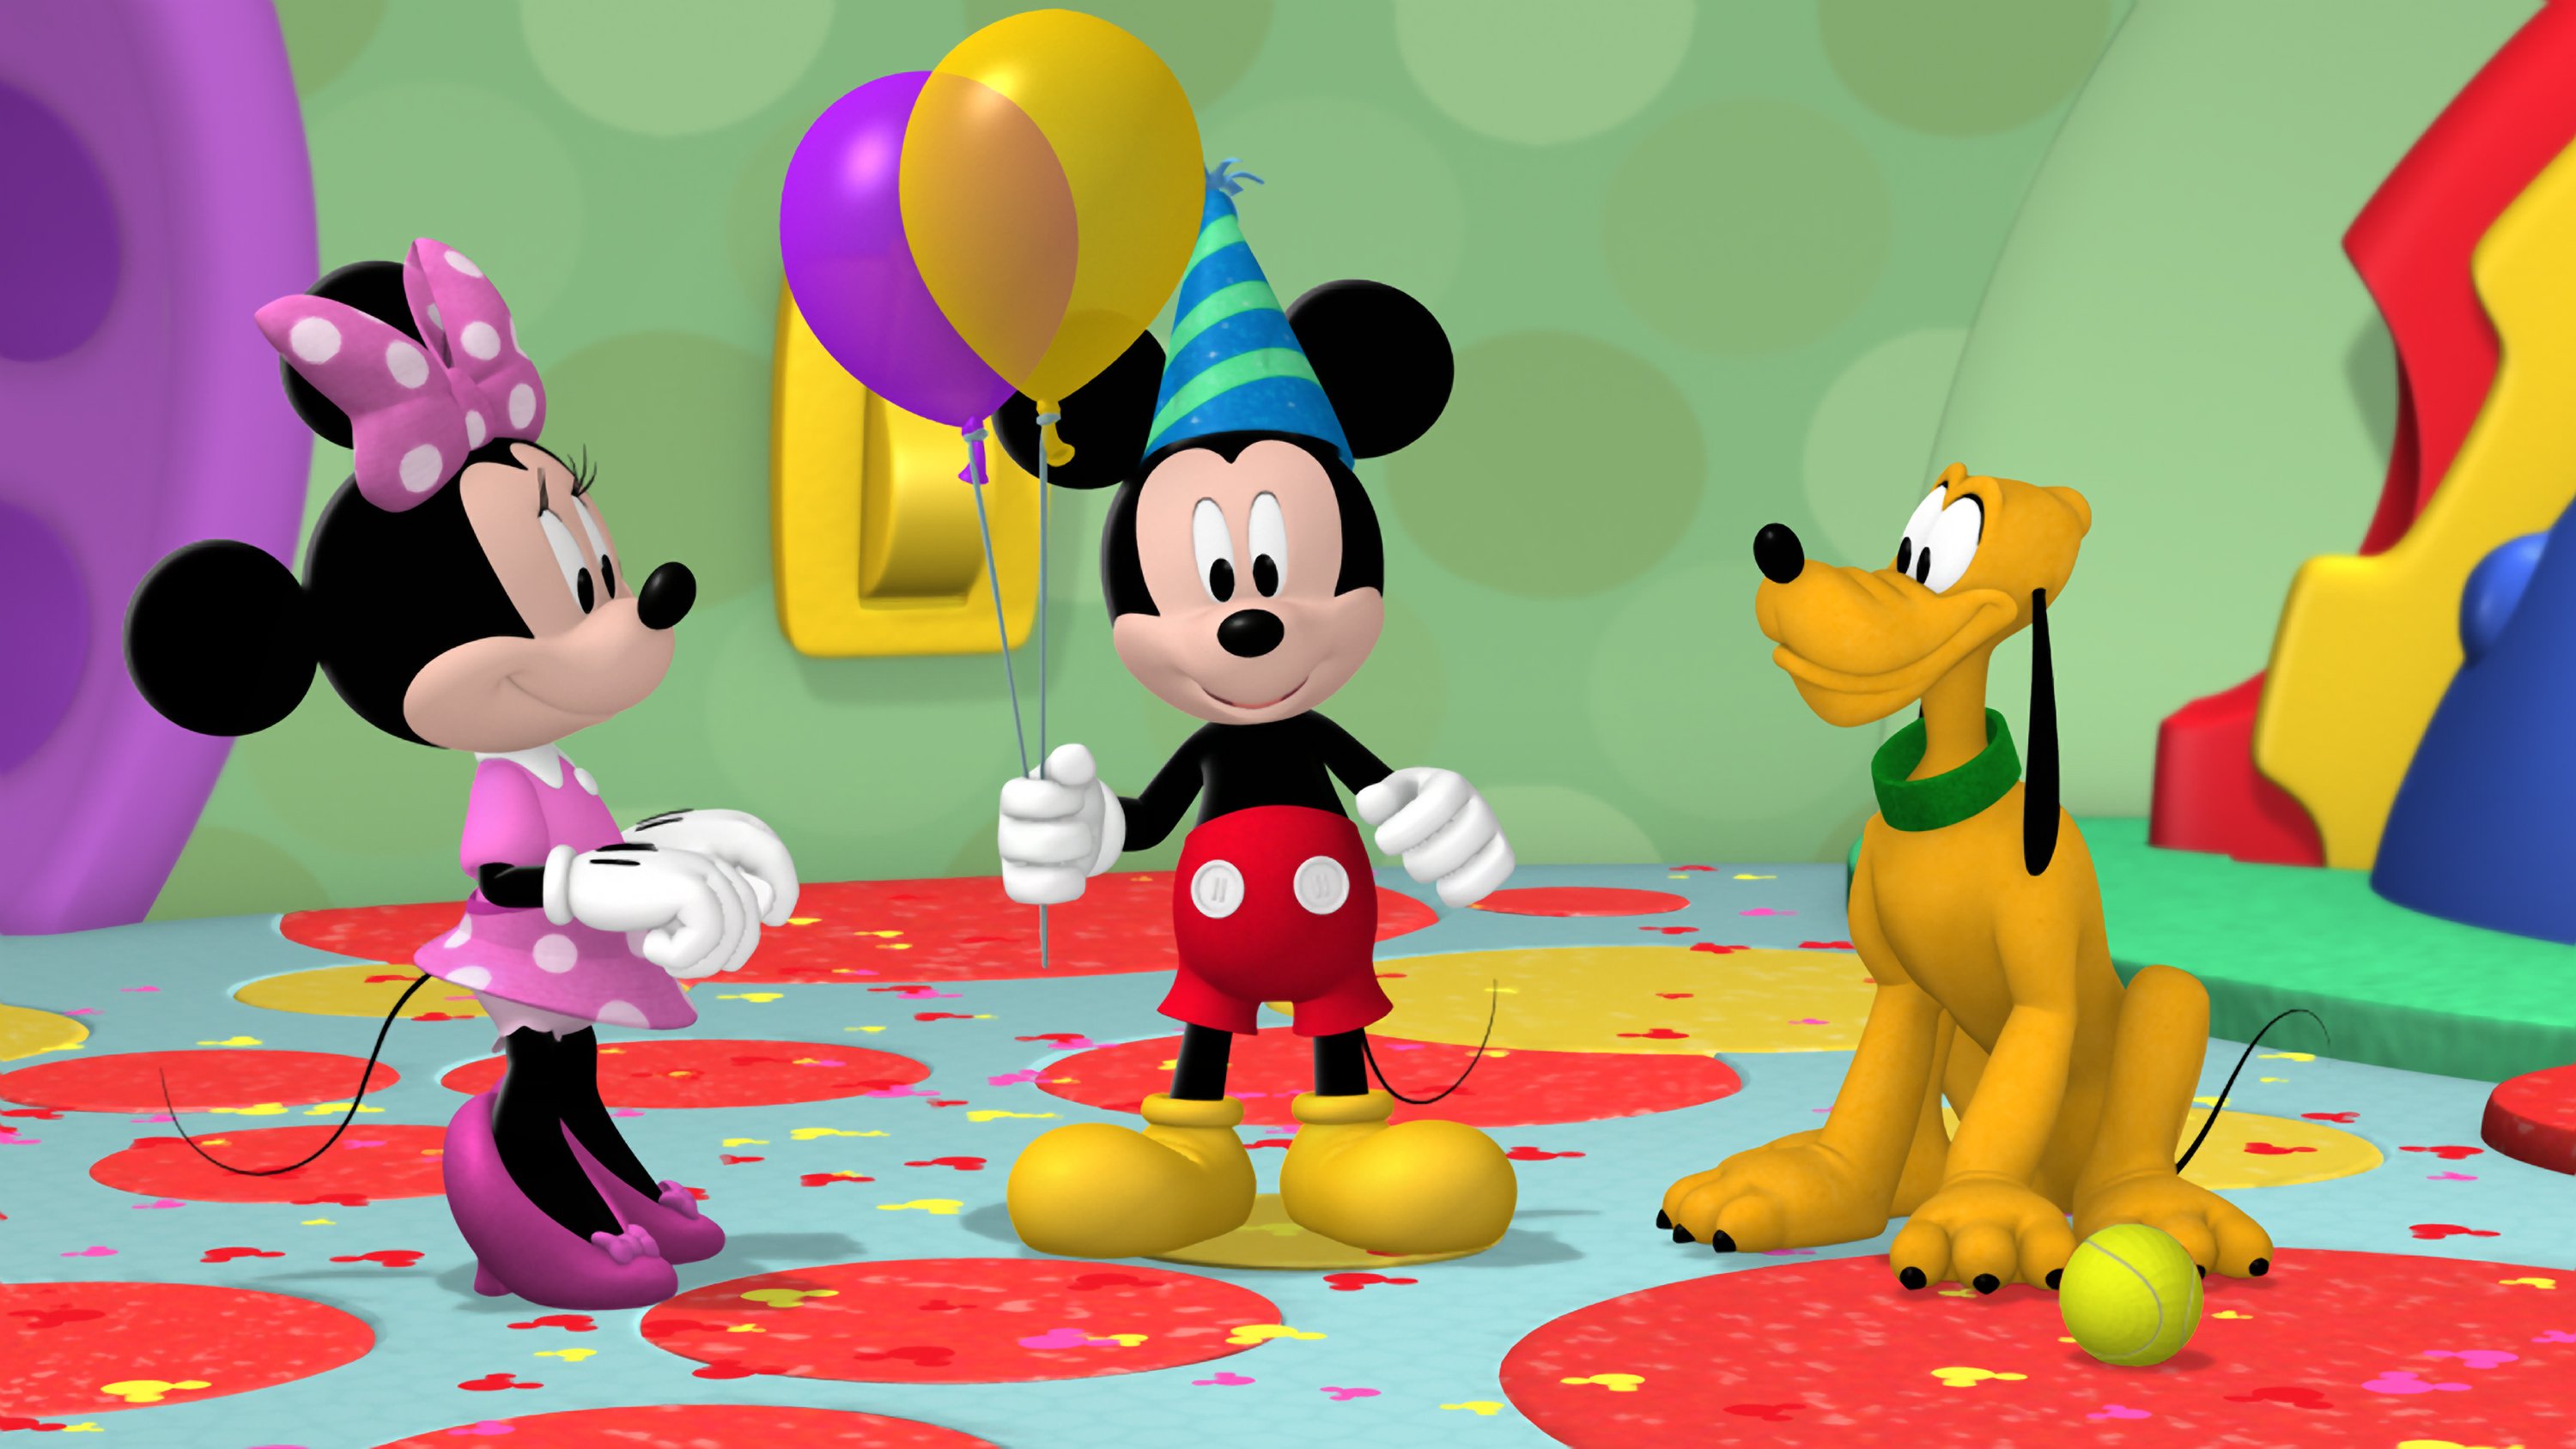 'Mickey's Happy Mousekeday' Episode of 'Mickey Mouse Clubhouse' 